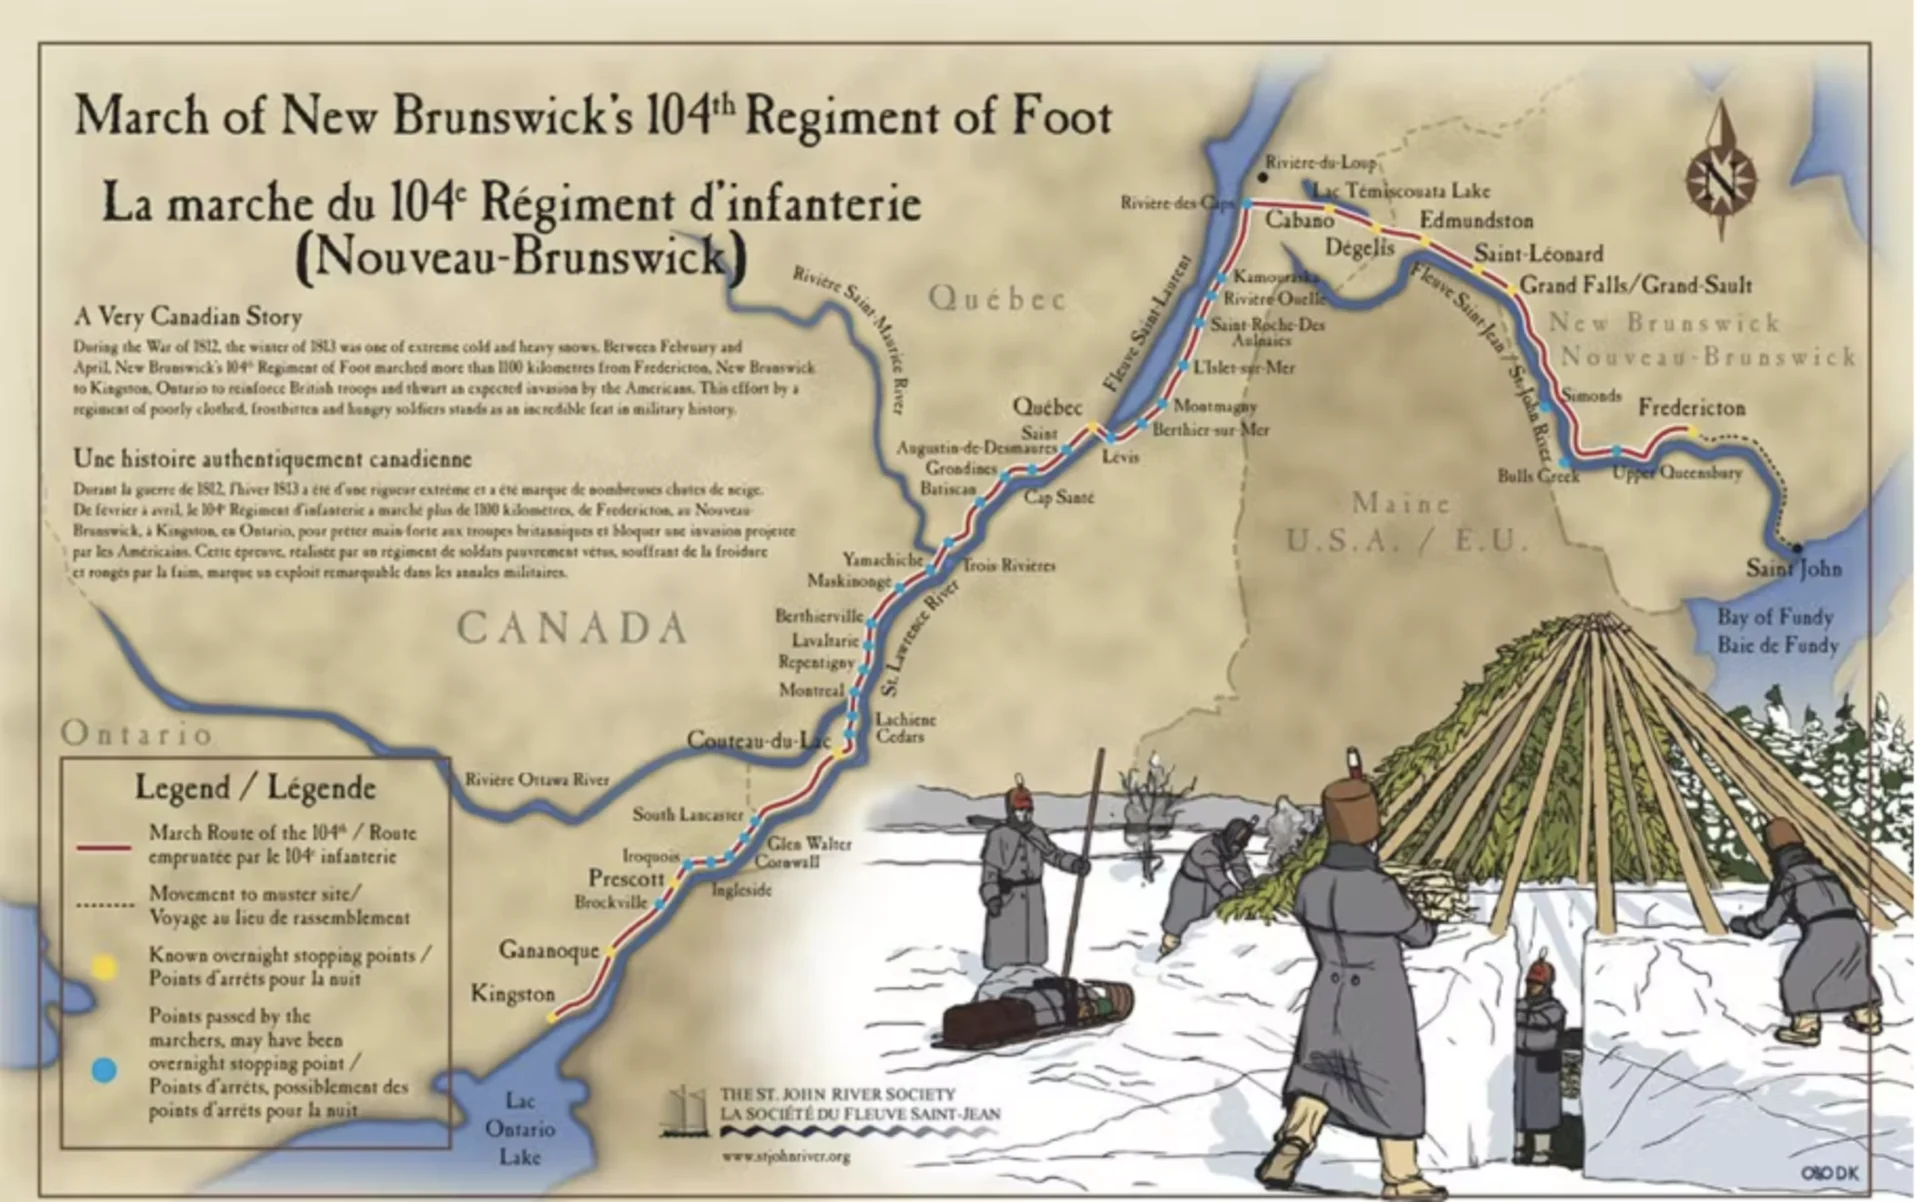 Meet the Black snowshoers who walked 1,000 kilometres across Canada in 1813